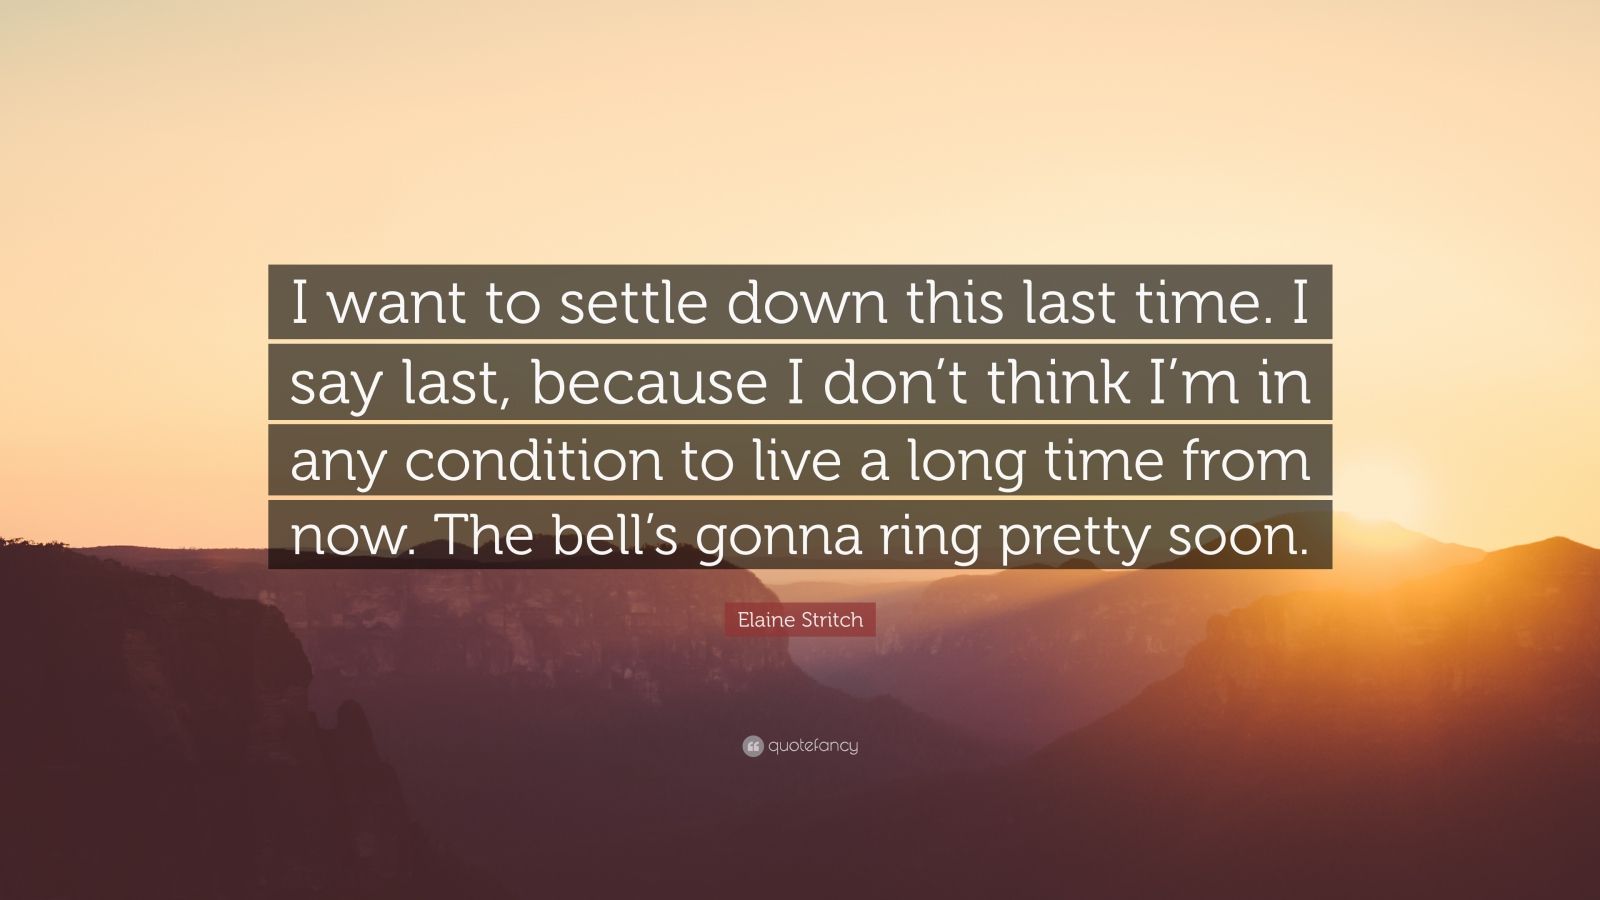 Elaine Stritch Quote: "I want to settle down this last ...